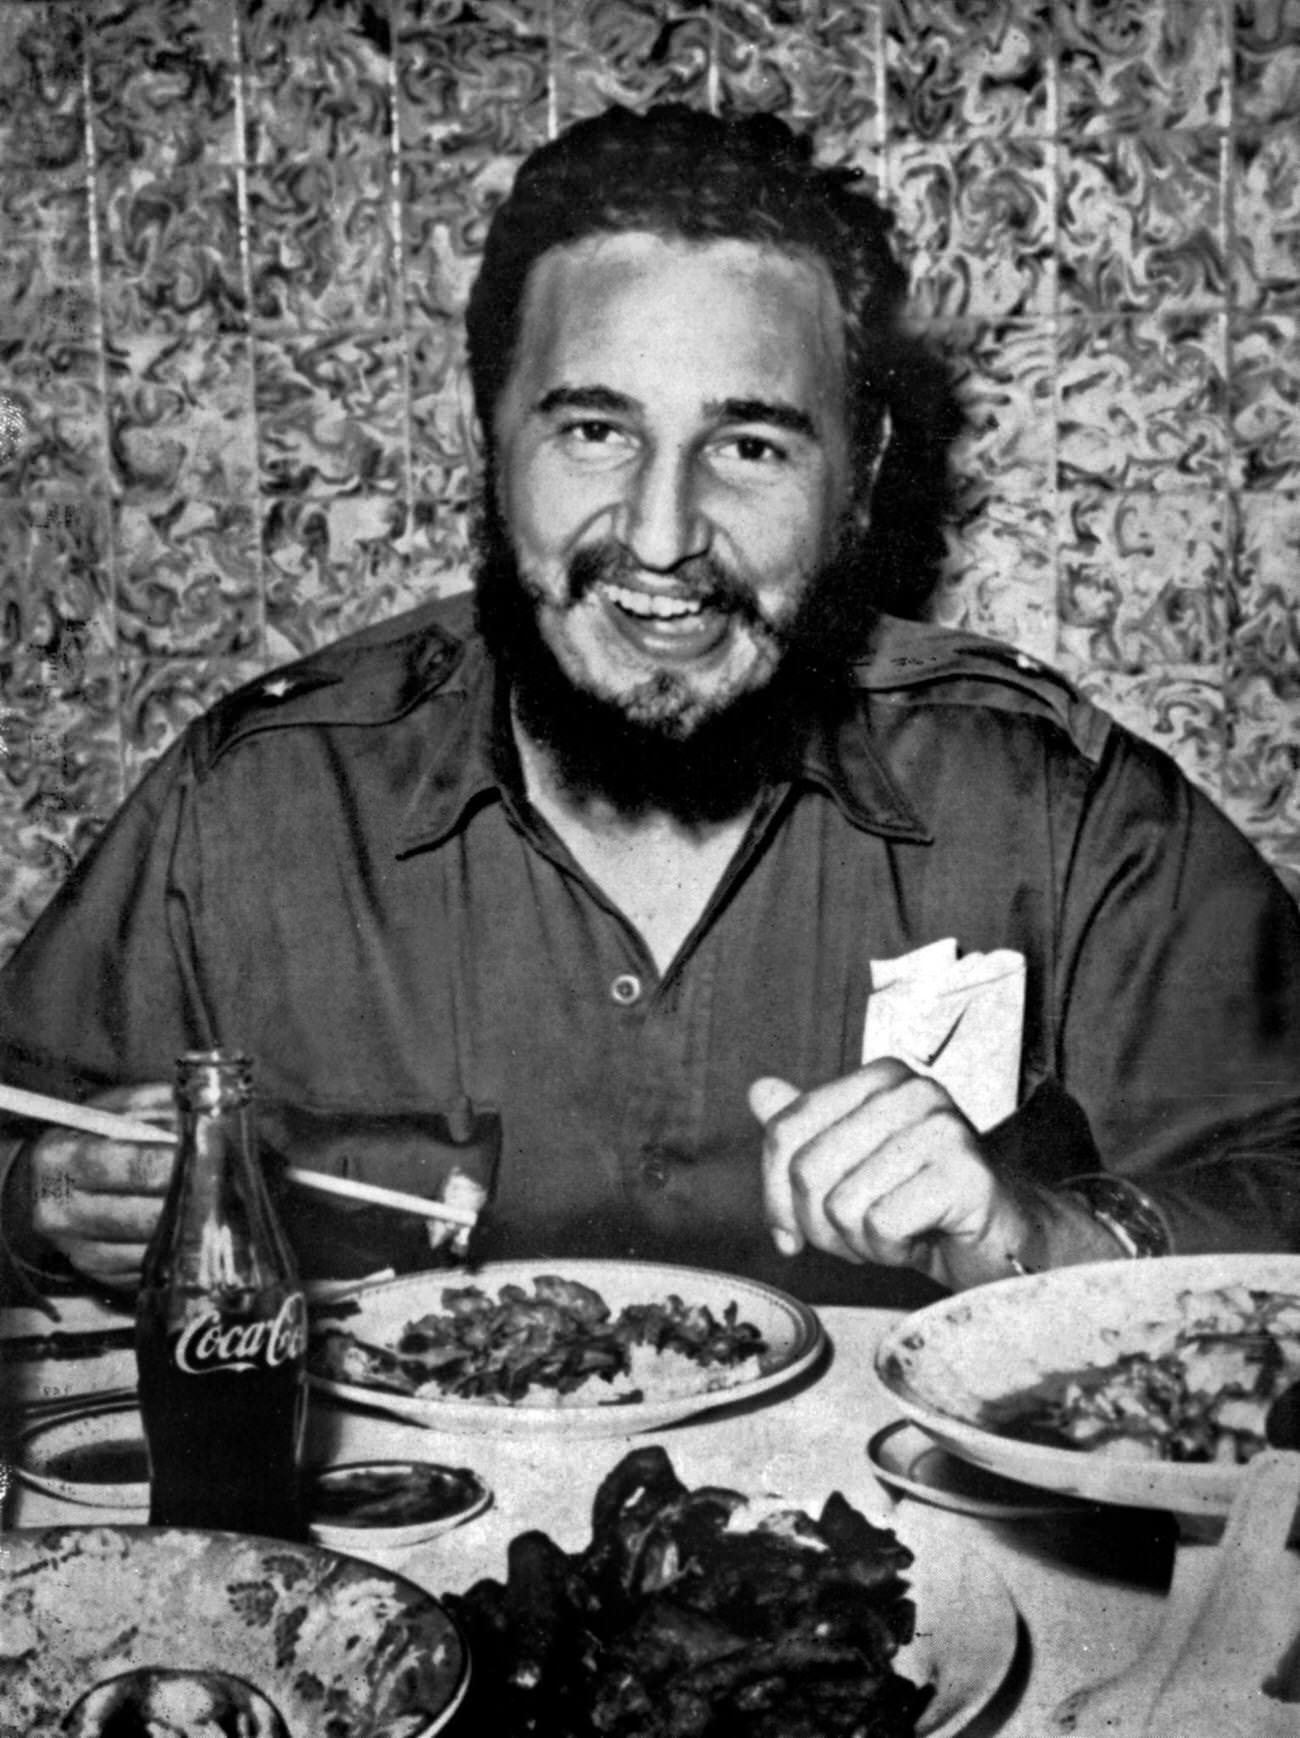 Fidel Castro eating a Chinese meal with chopsticks and drinking Coca-Cola, circa 1960.